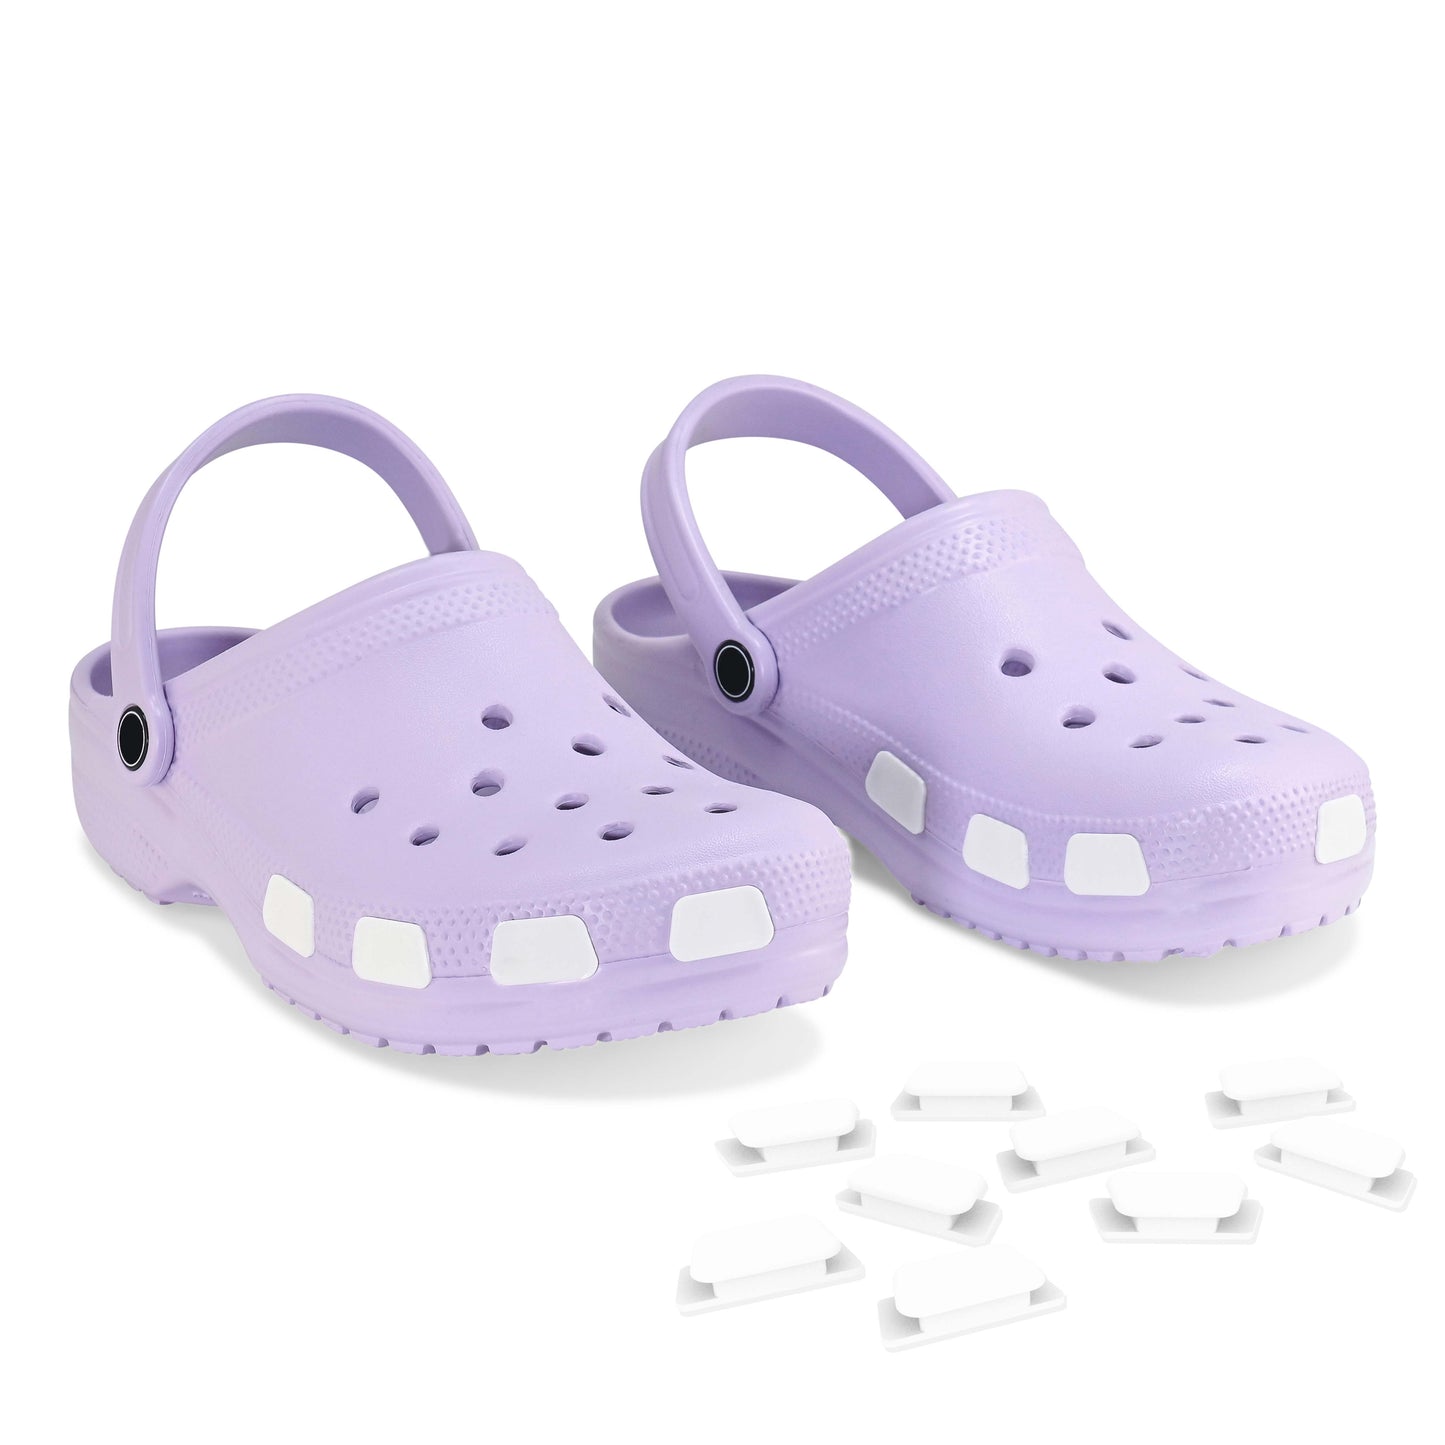 SHUTTERZ (WHITE) 14 Pack  Colored Shoe Charms Compatible with Classic Crocs, Crush Crocs, and All Terrain Crocs